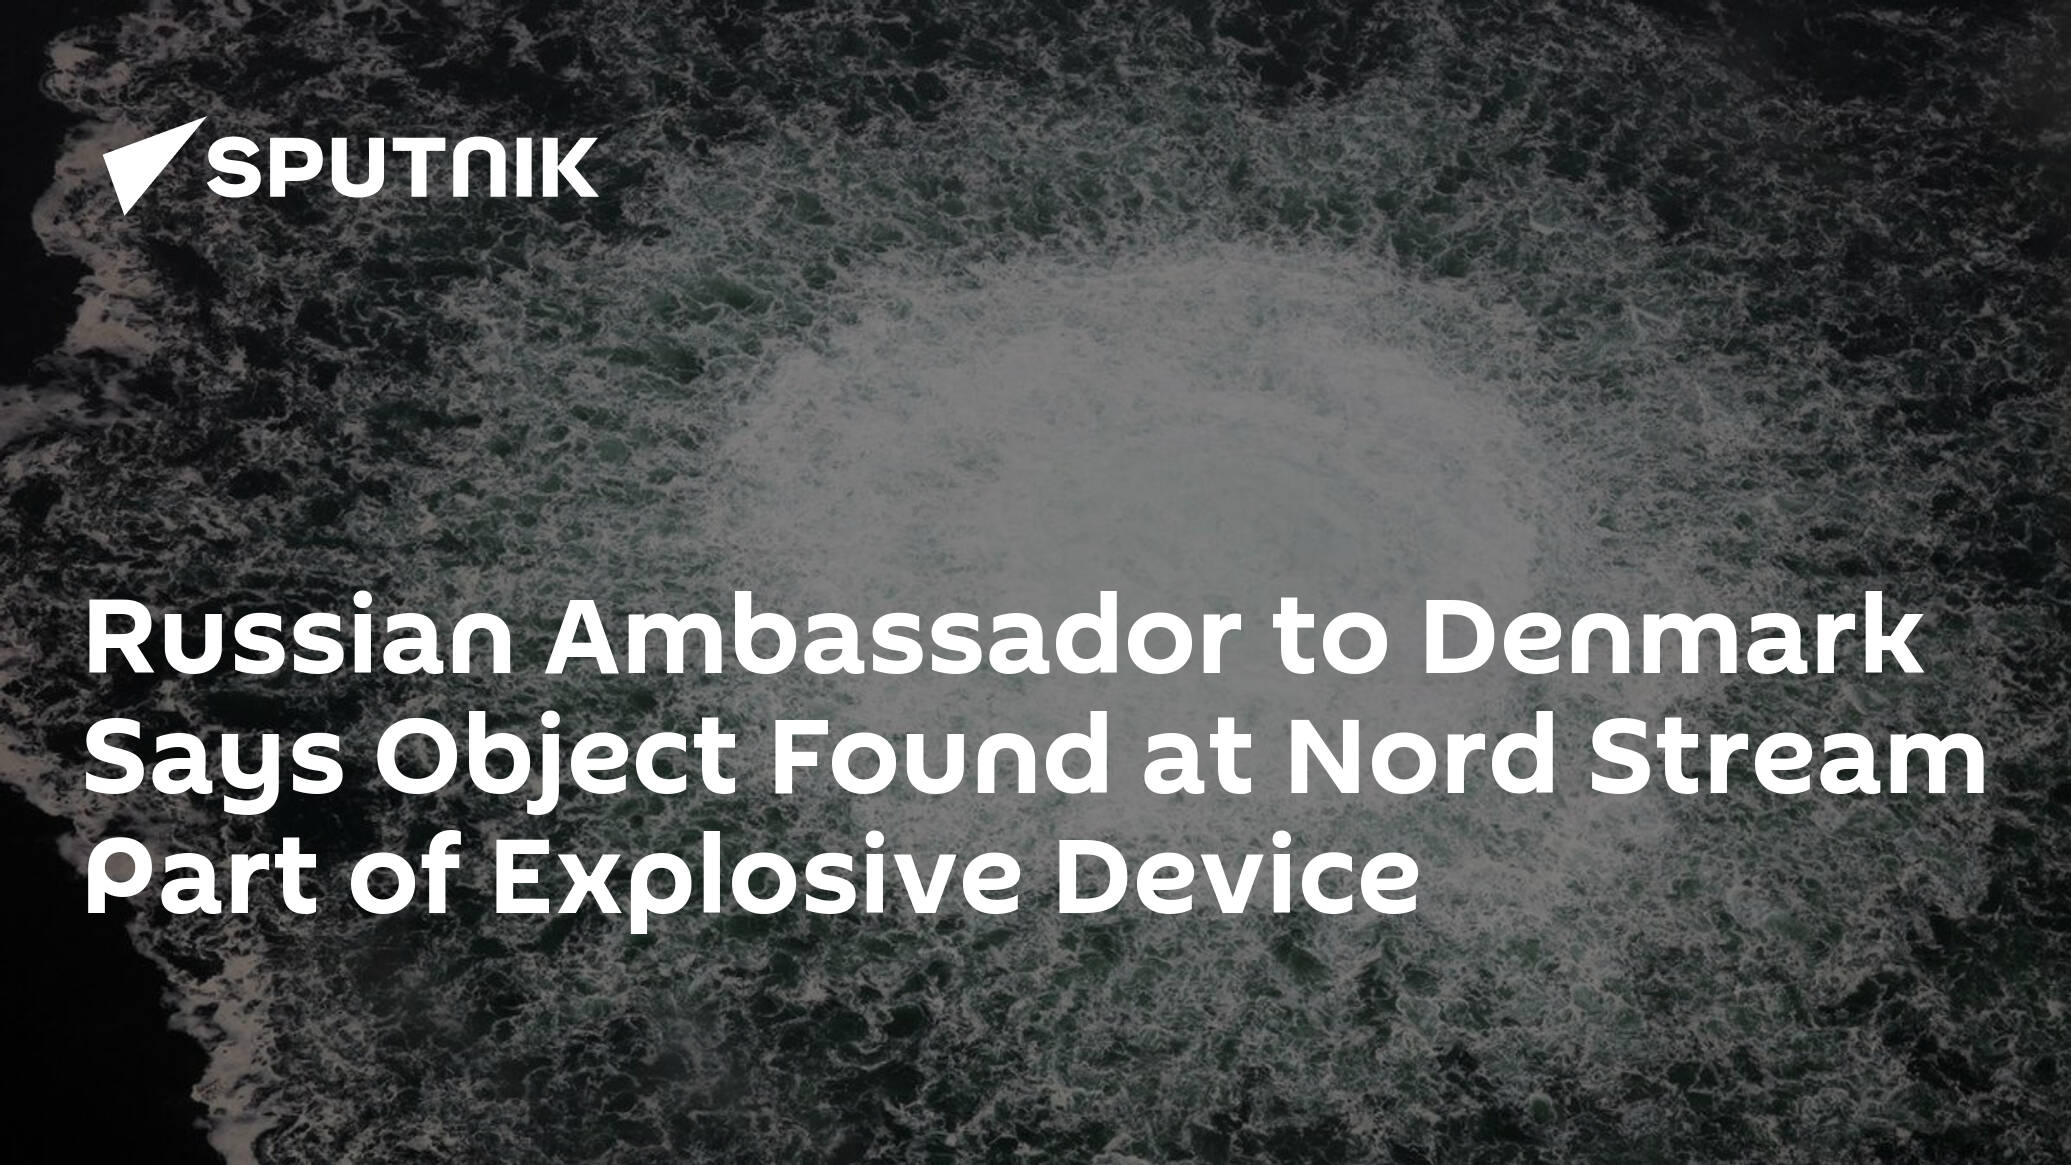 Russian Ambassador to Denmark Says Object Found at Nord Stream Part of Explosive Device